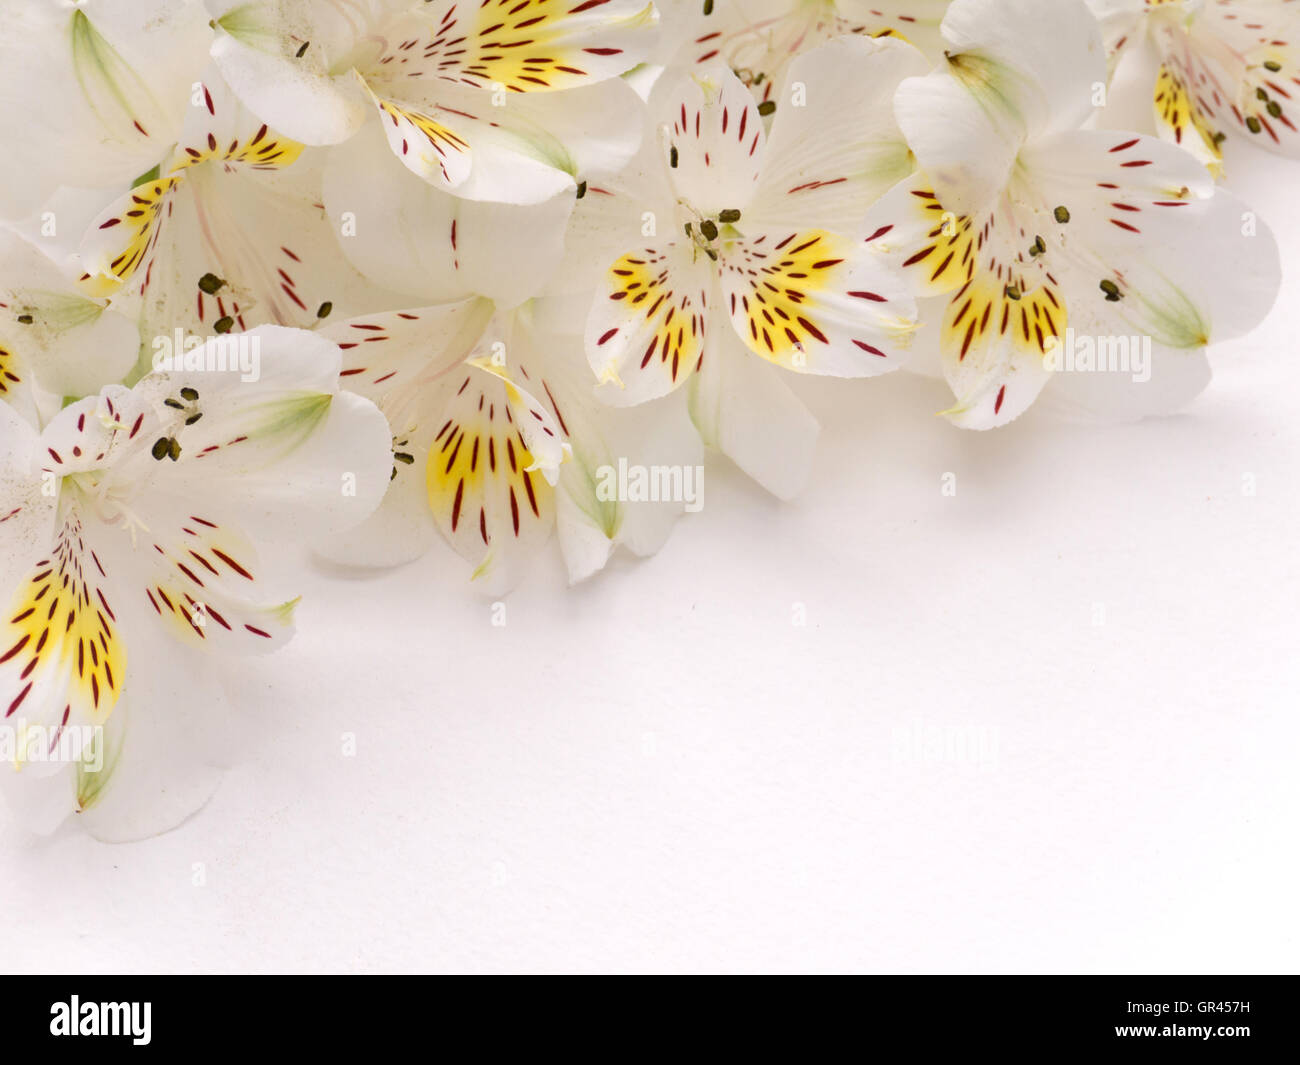 Delicate white and yellow alstroemeria flowers in the corner of white background Stock Photo